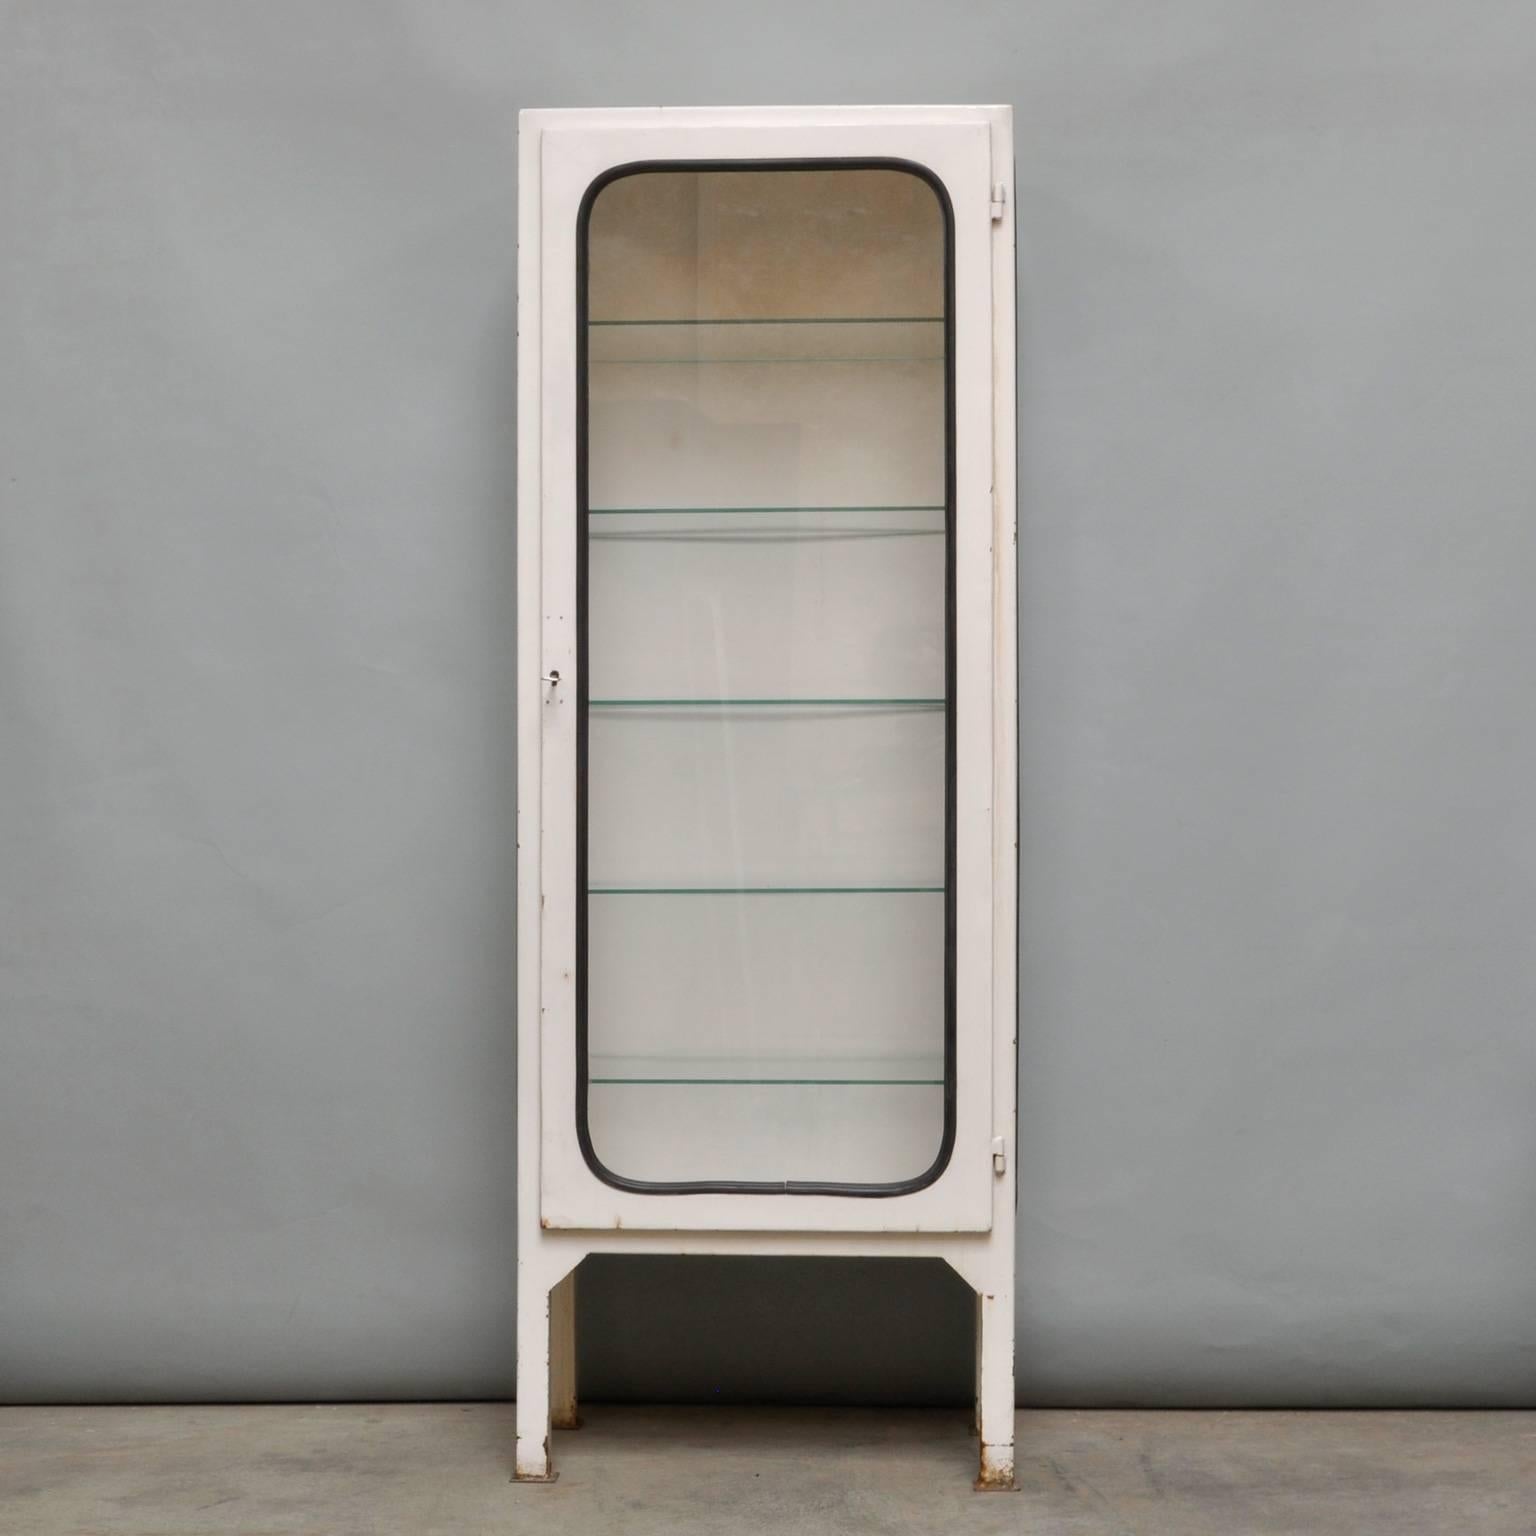 This medicine cabinet, designed in the 1970s and produced circa 1975 in Hungary, is made of steel and glass. The glass panes are held in place by a black rubber strip. The cabinet features five new adjustable glass shelves and a functioning lock.